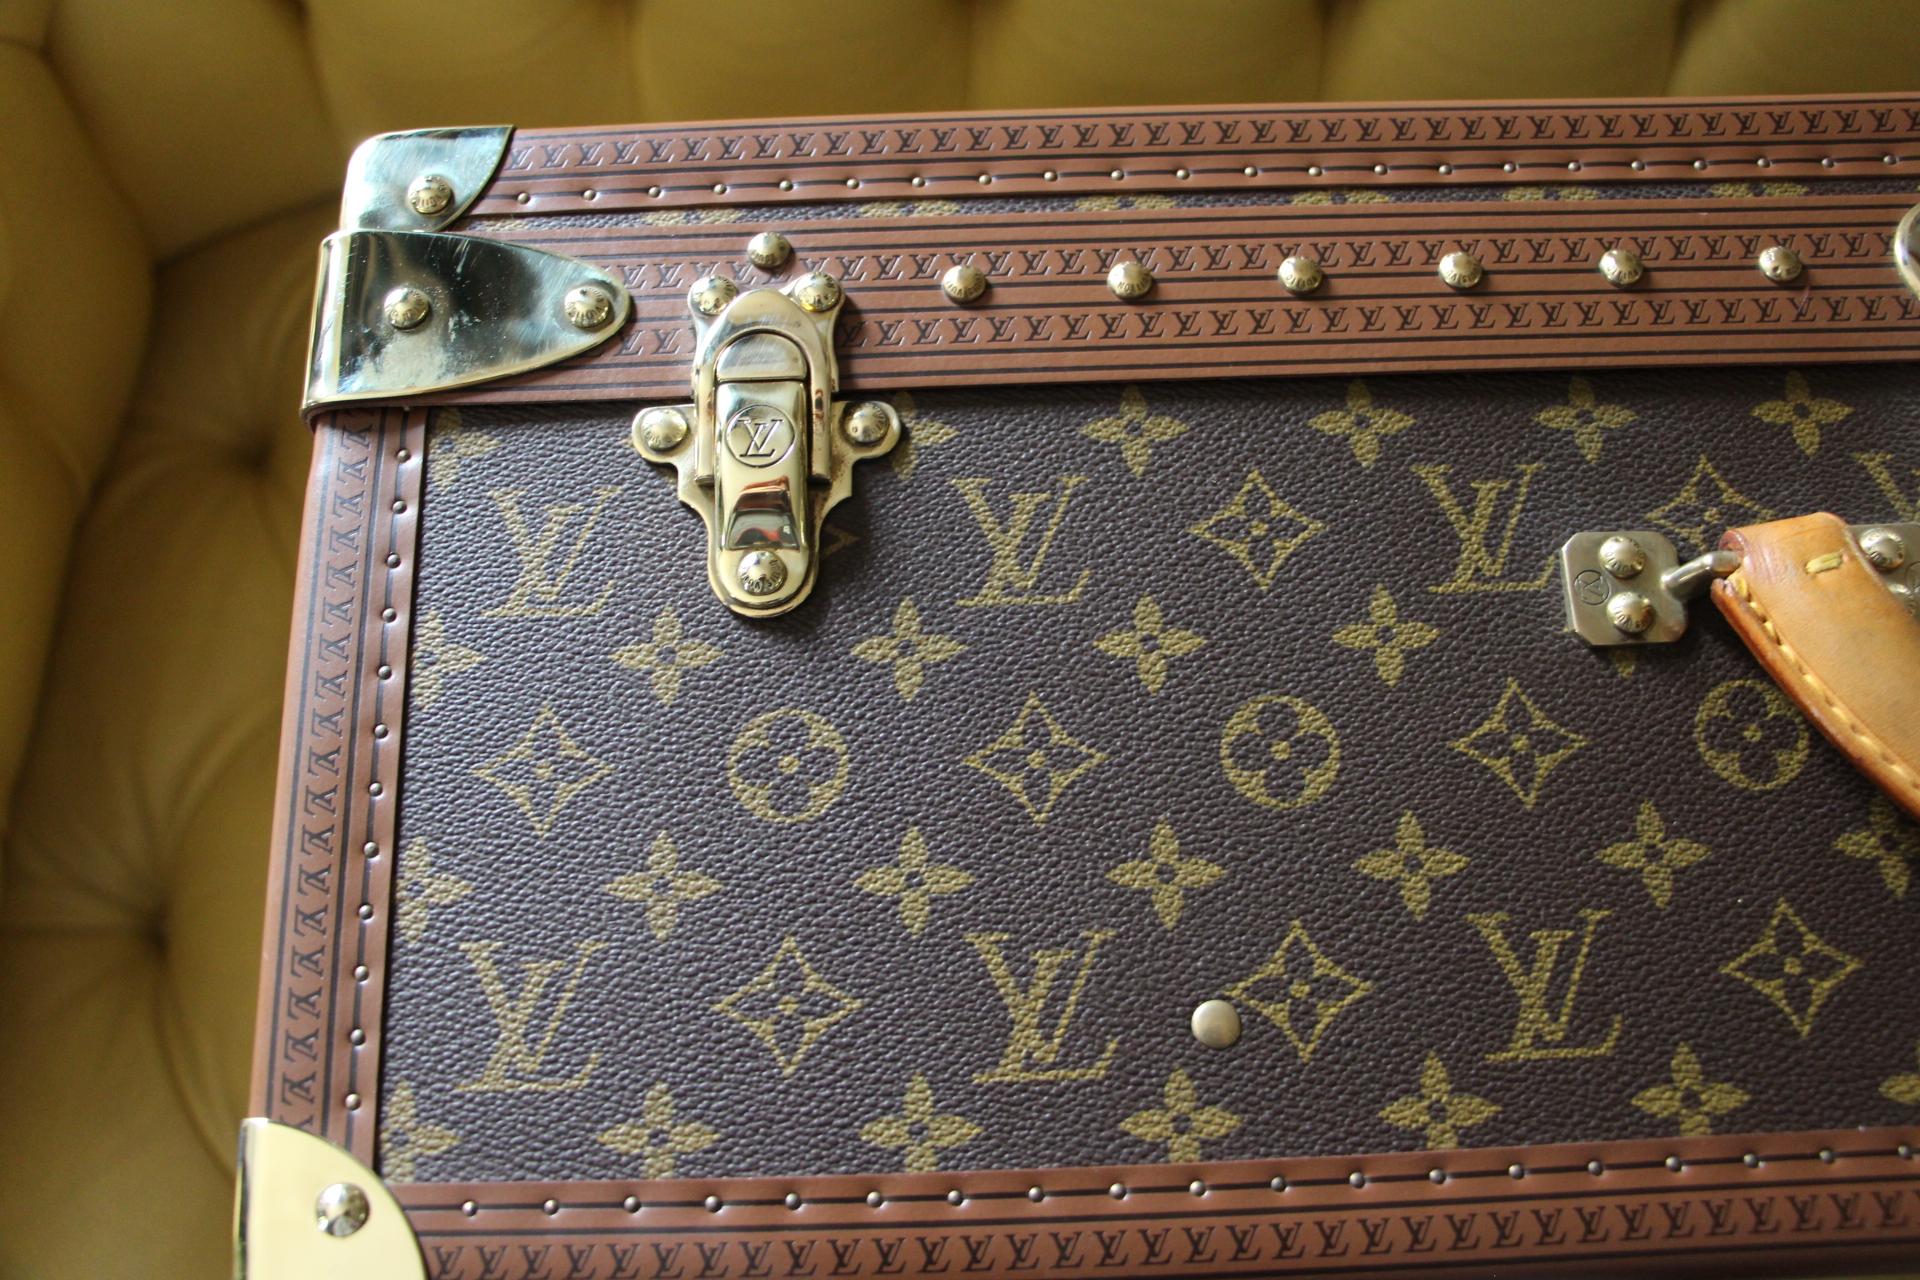 This is a magnificent Louis Vuitton Alzer monogramm suitcase. It features 
all Louis Vuitton stamped solid brass fittings: locks, clasps and studs.
It has got a large and comfortable all leather handle as well as its original name tag holder in